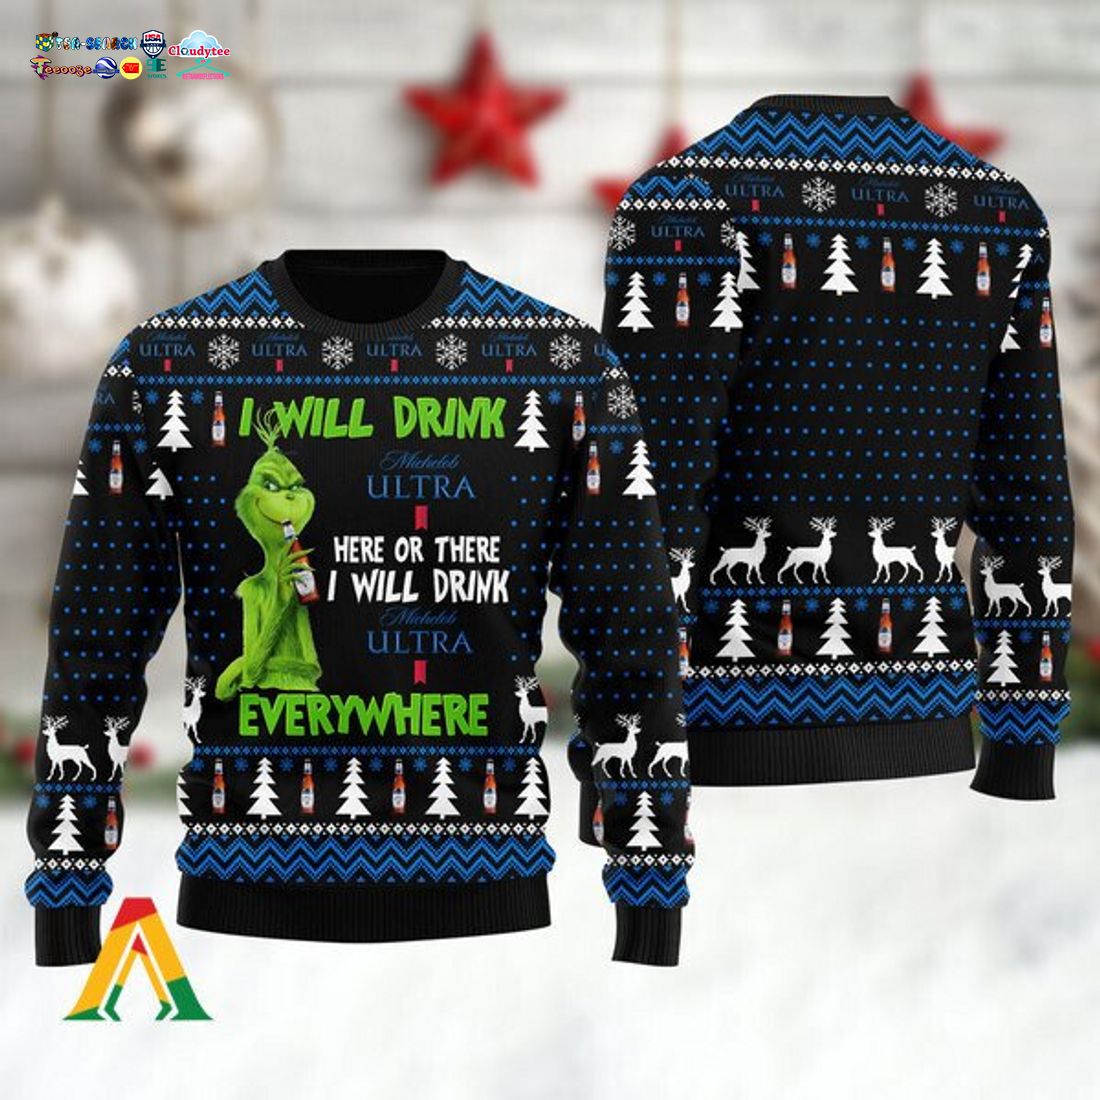 grinch-i-will-drink-michelob-ultra-everywhere-ugly-christmas-sweater-1-9CbuC.jpg